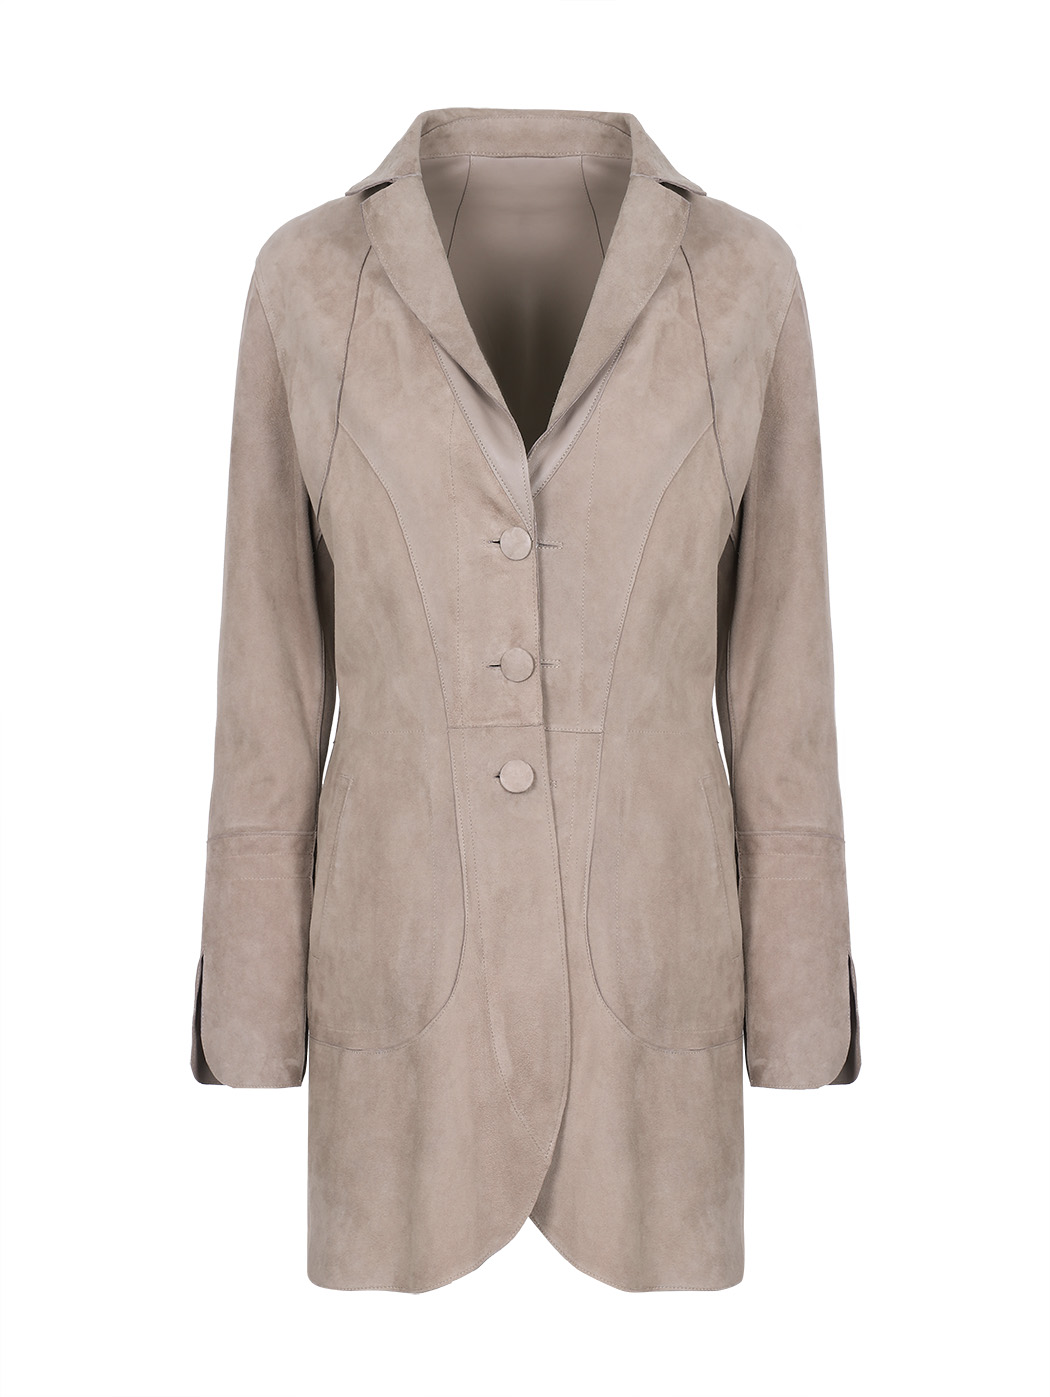 Giacca 3/4 reversibile in pelle taupe